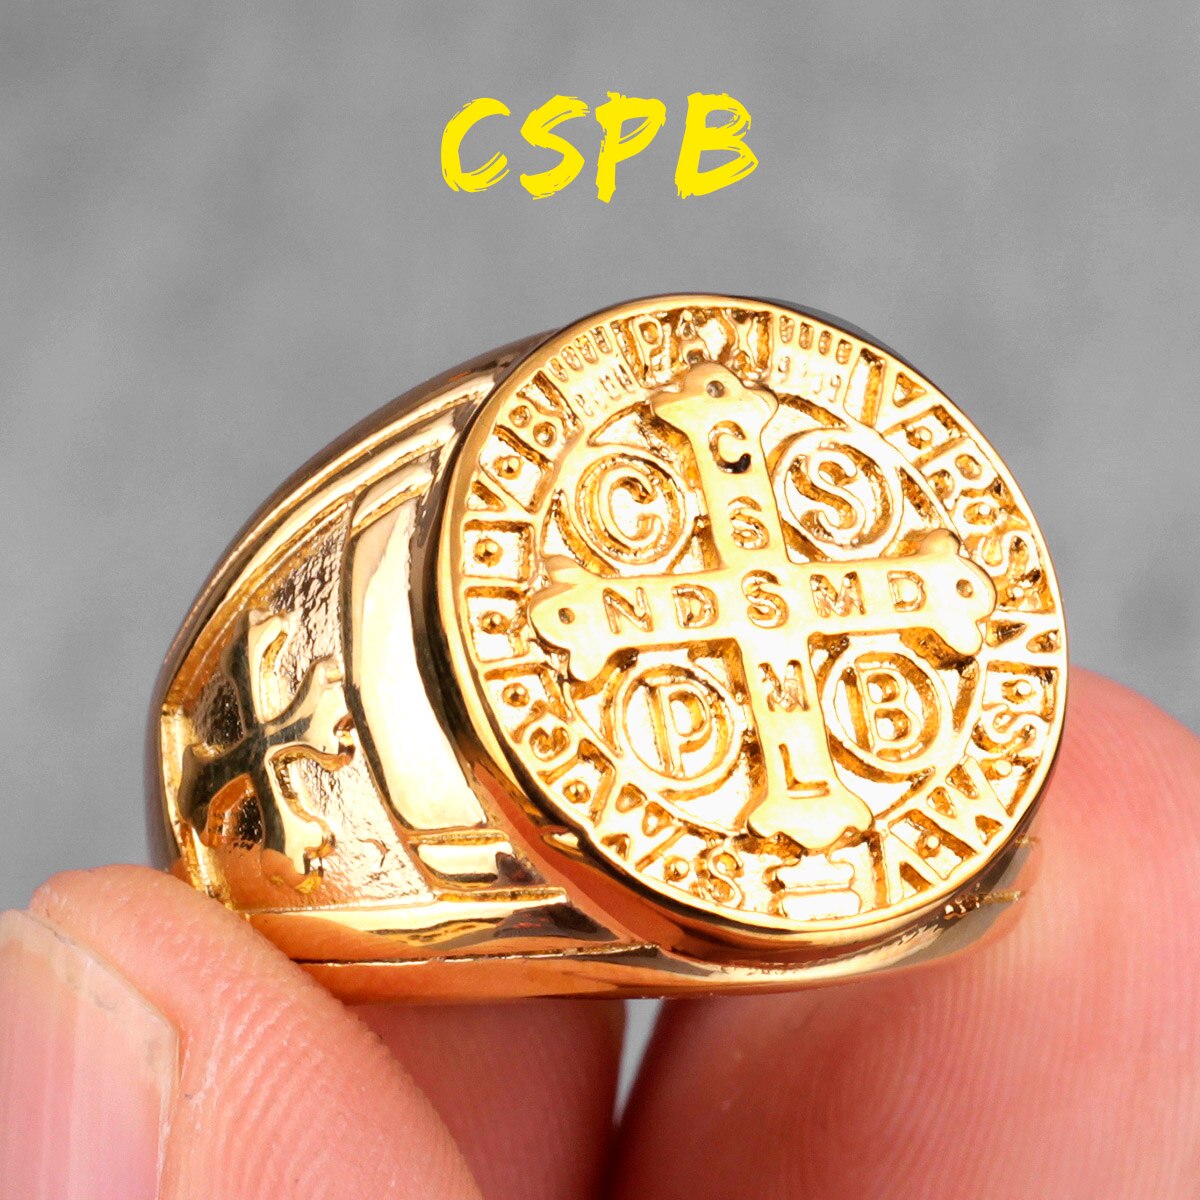 Exorcism Saint Benedict Cspb Cross Men Rings Punk Hip Hop for Boyfriend Male Stainless Steel Jewelry Creativity Gift R460-Gold